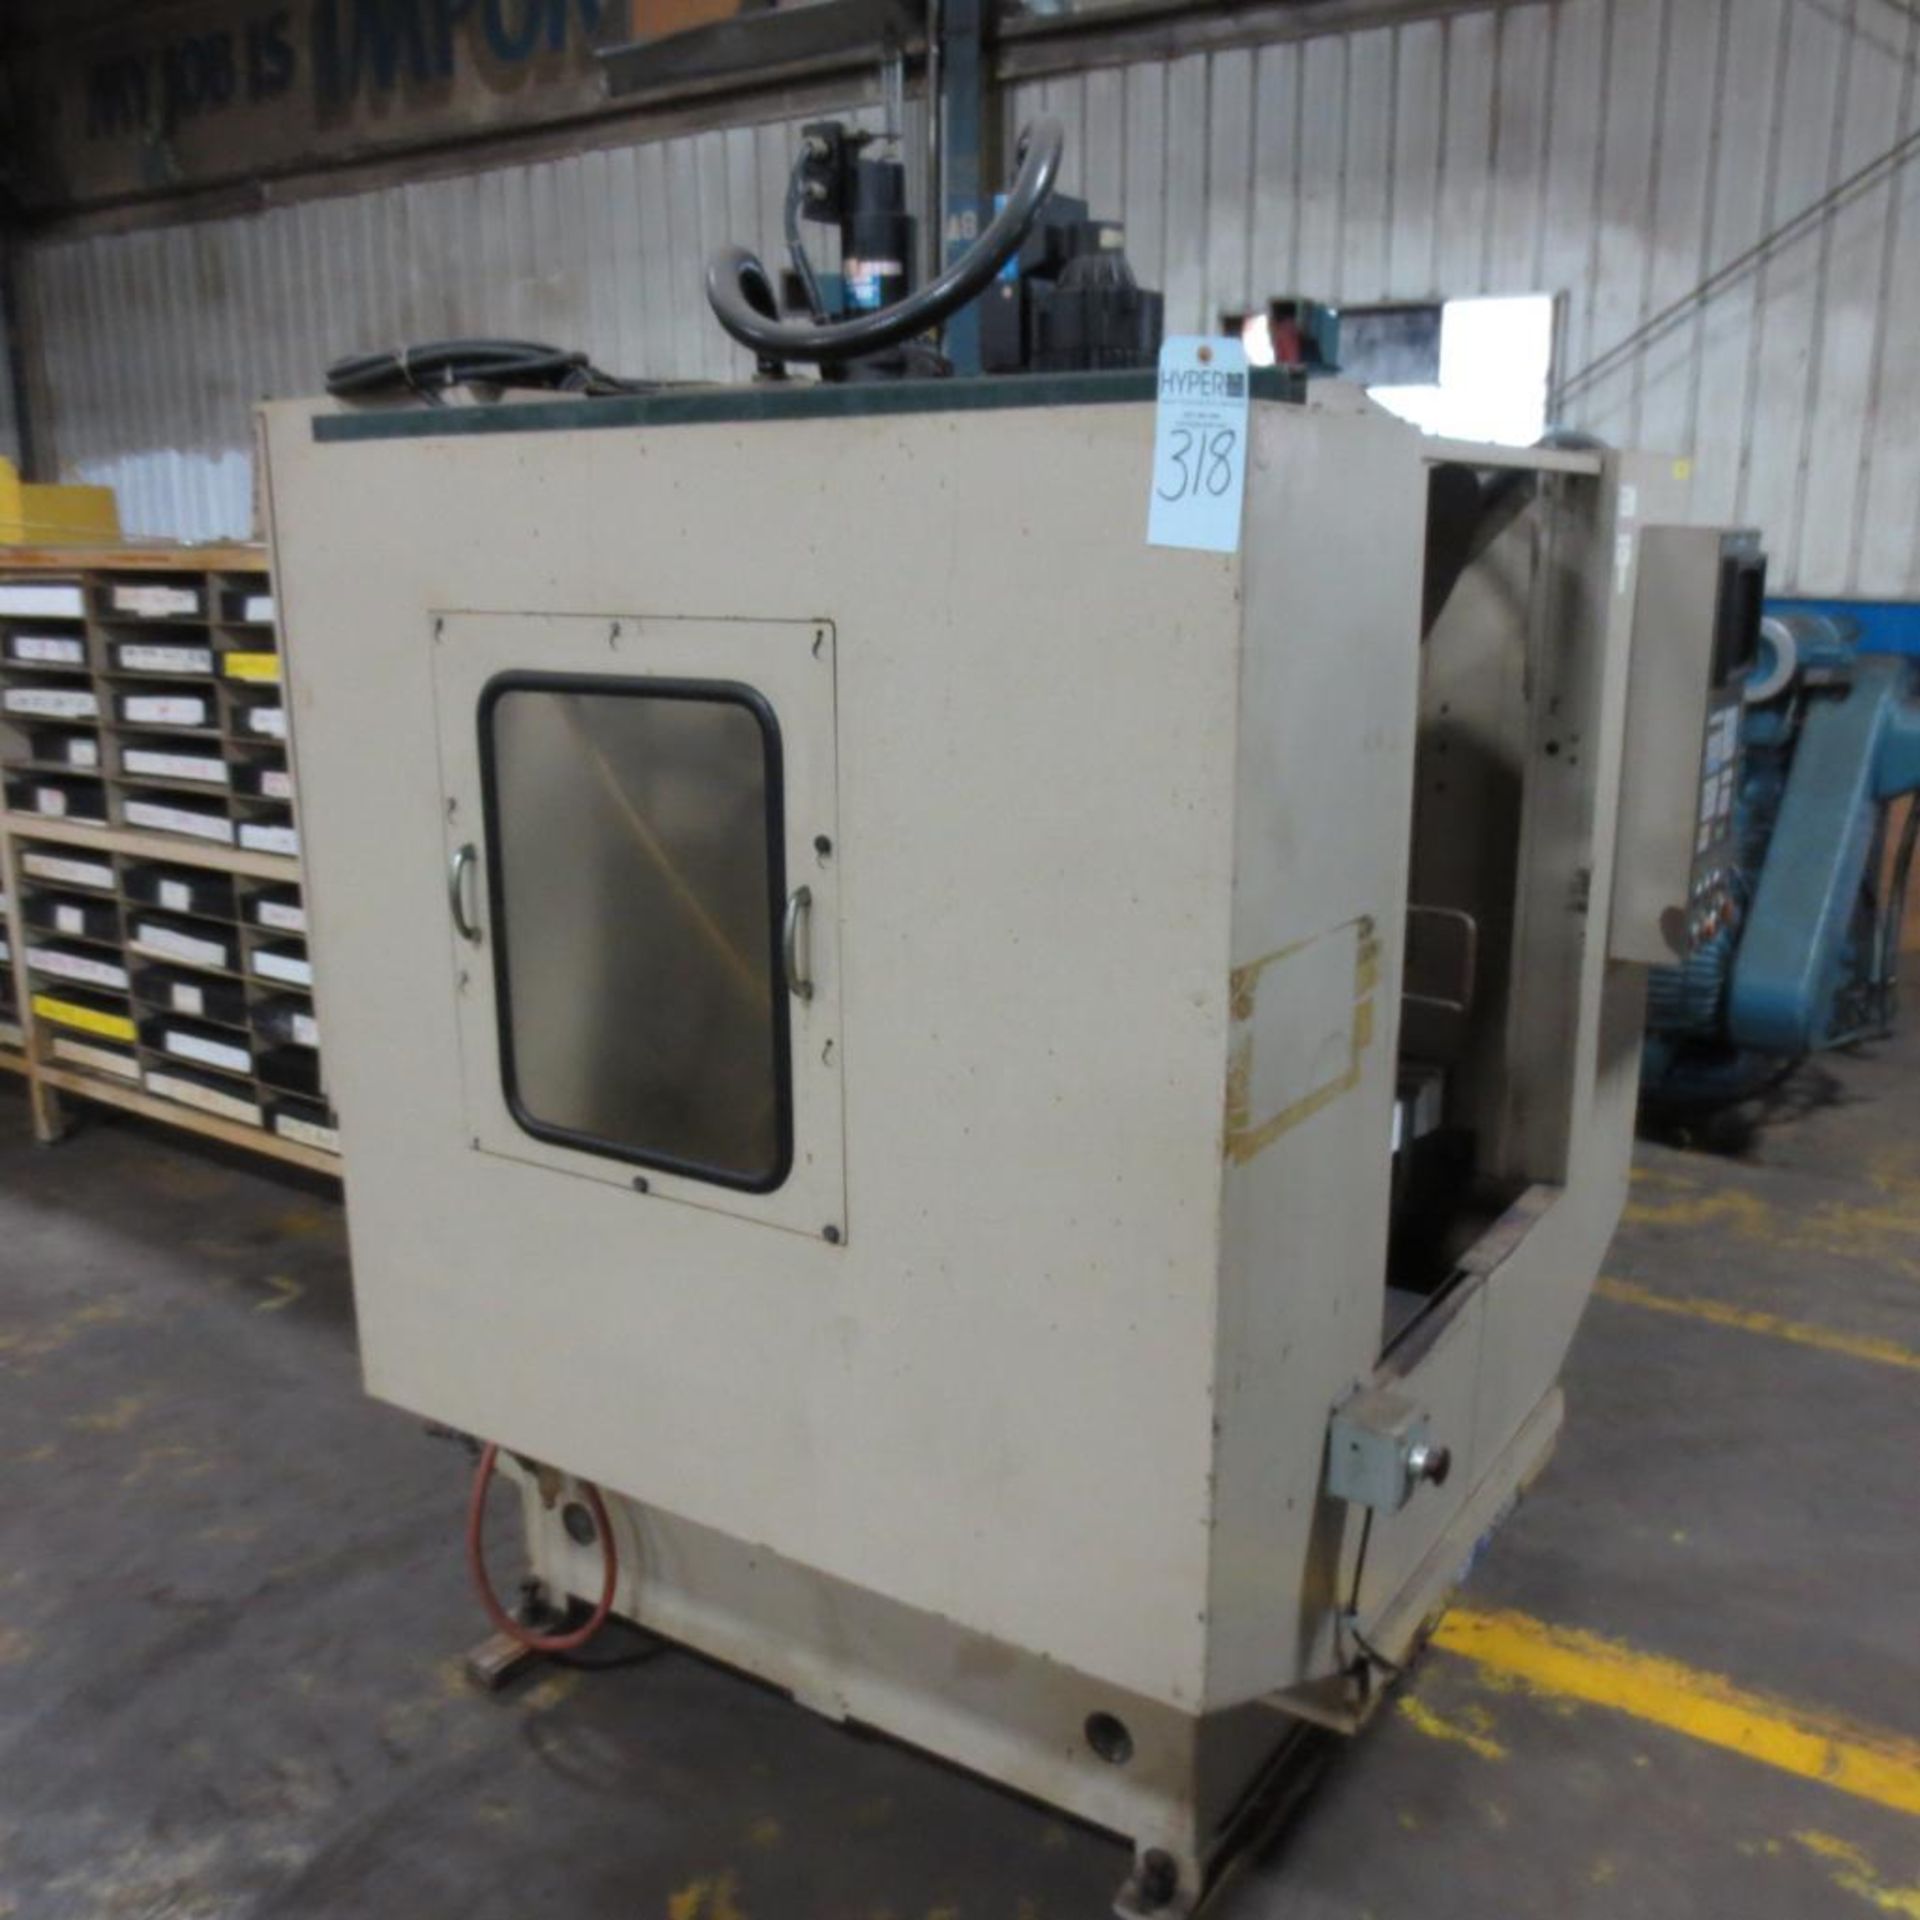 Brother TC-225 CNC Tapping Center. Loading Fee is $350.00 - Image 7 of 8